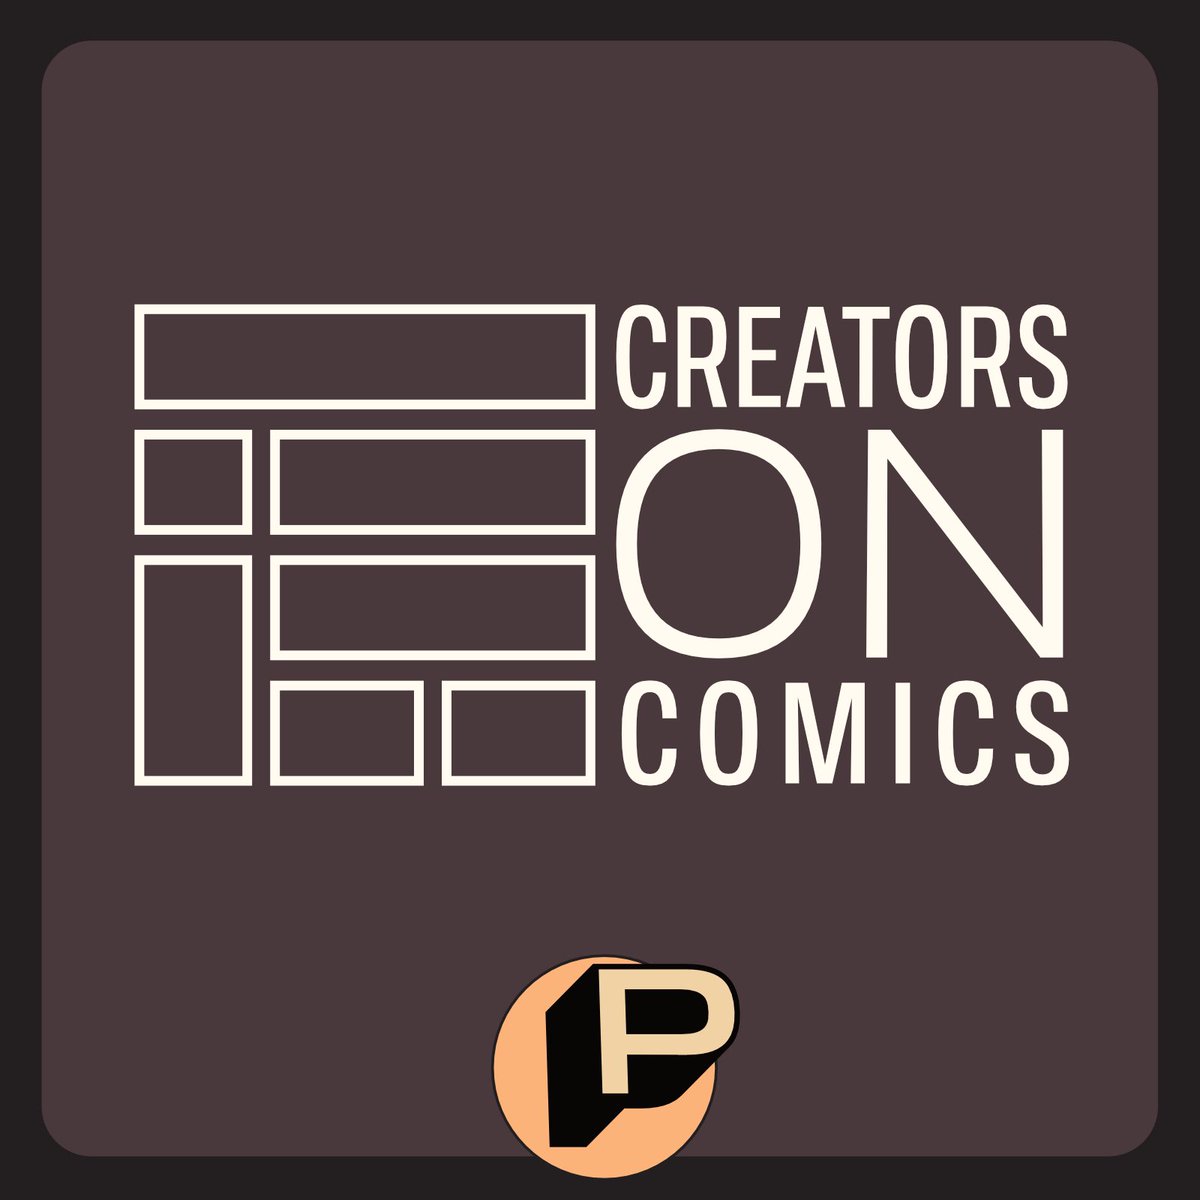 Another new episode of Creators on Comics is up now with more @seqmagazine Best Graphic Novel nominees! The Laundrymen’s @Radchenka talks with Our War’s @Derrah & Luke Henderson Apple podcasts.apple.com/ca/podcast/cre… Spotify open.spotify.com/episode/2KfN60…